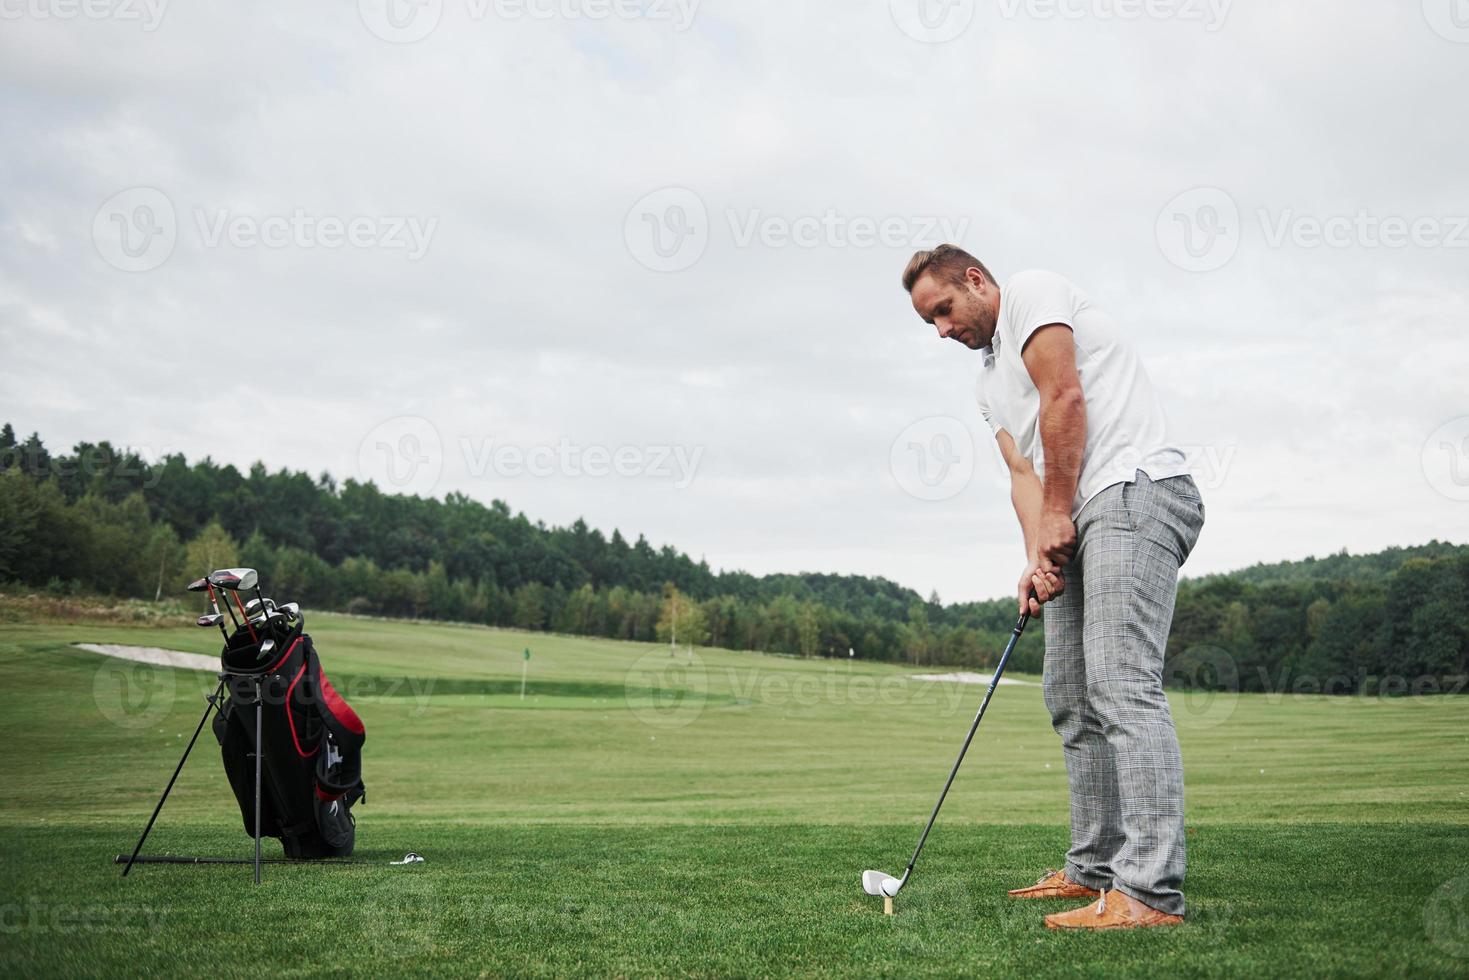 Pro golf player aiming shot with club on course. Male golfer on putting green about to take the hit photo